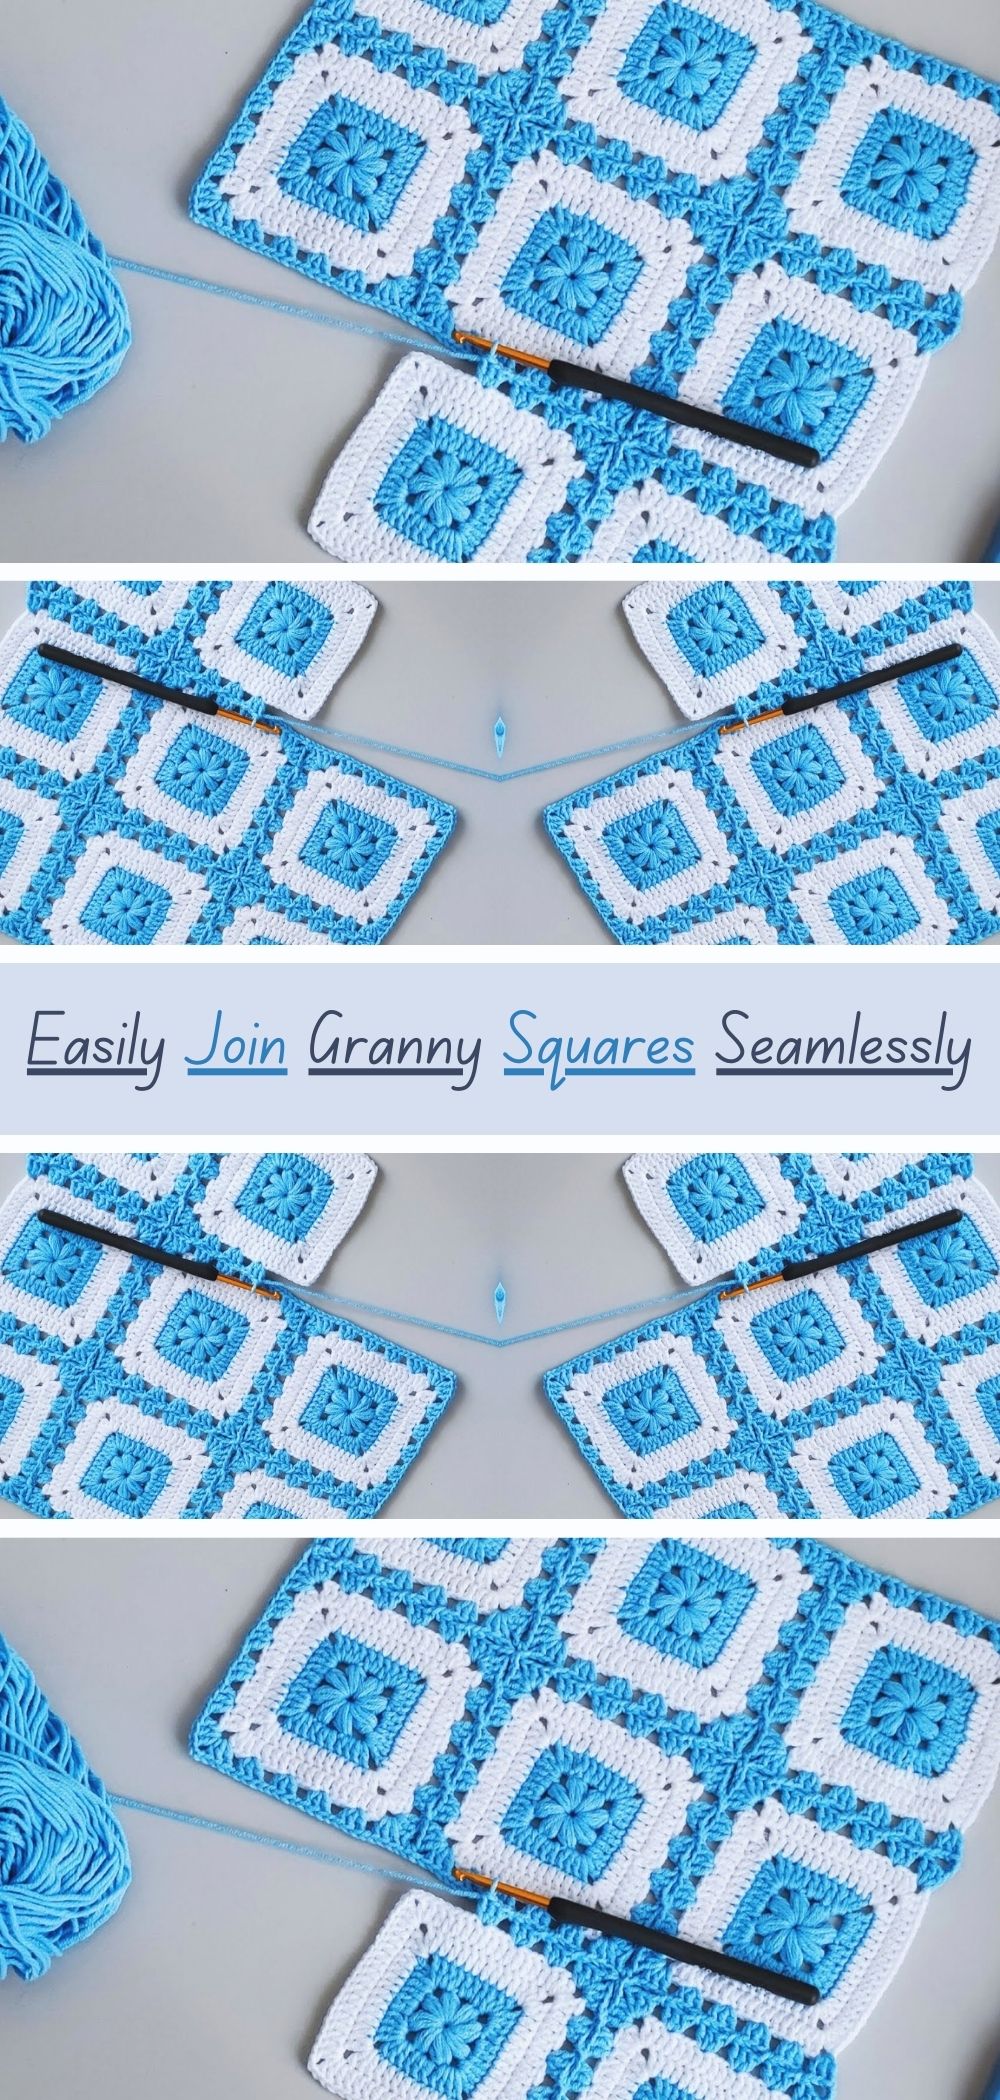 Easily Join Granny Squares Seamlessly - Learn how to join granny squares together seamlessly with this easy-to-follow tutorial